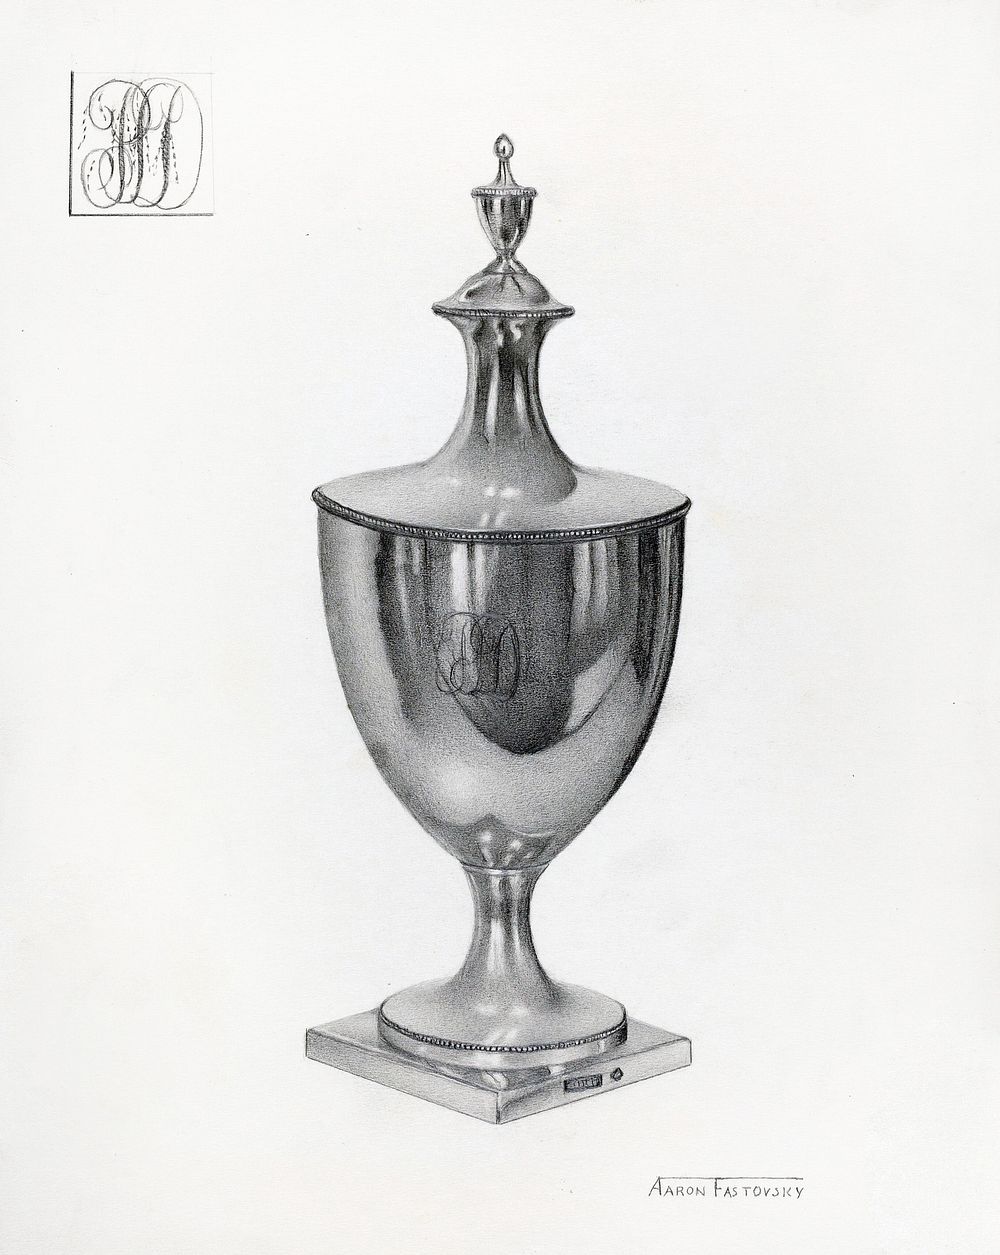 Silver Sugar Bowl (c.1936) by Aaron Fastovsky. Original from The National Gallery of Art. Digitally enhanced by rawpixel.